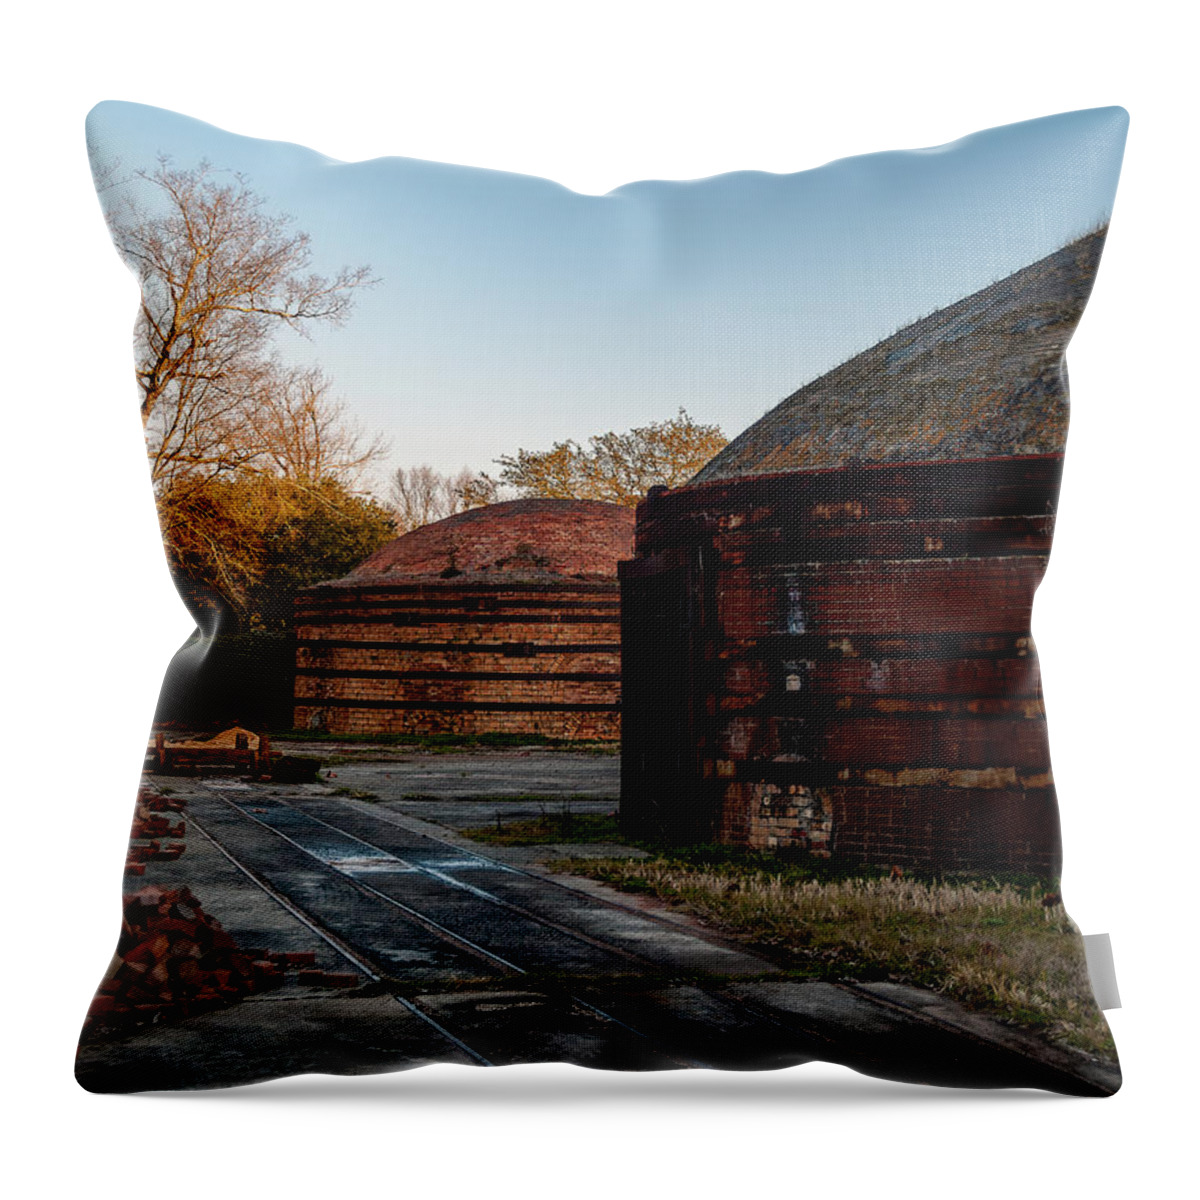 2010 Throw Pillow featuring the photograph Brickworks 8 by Charles Hite